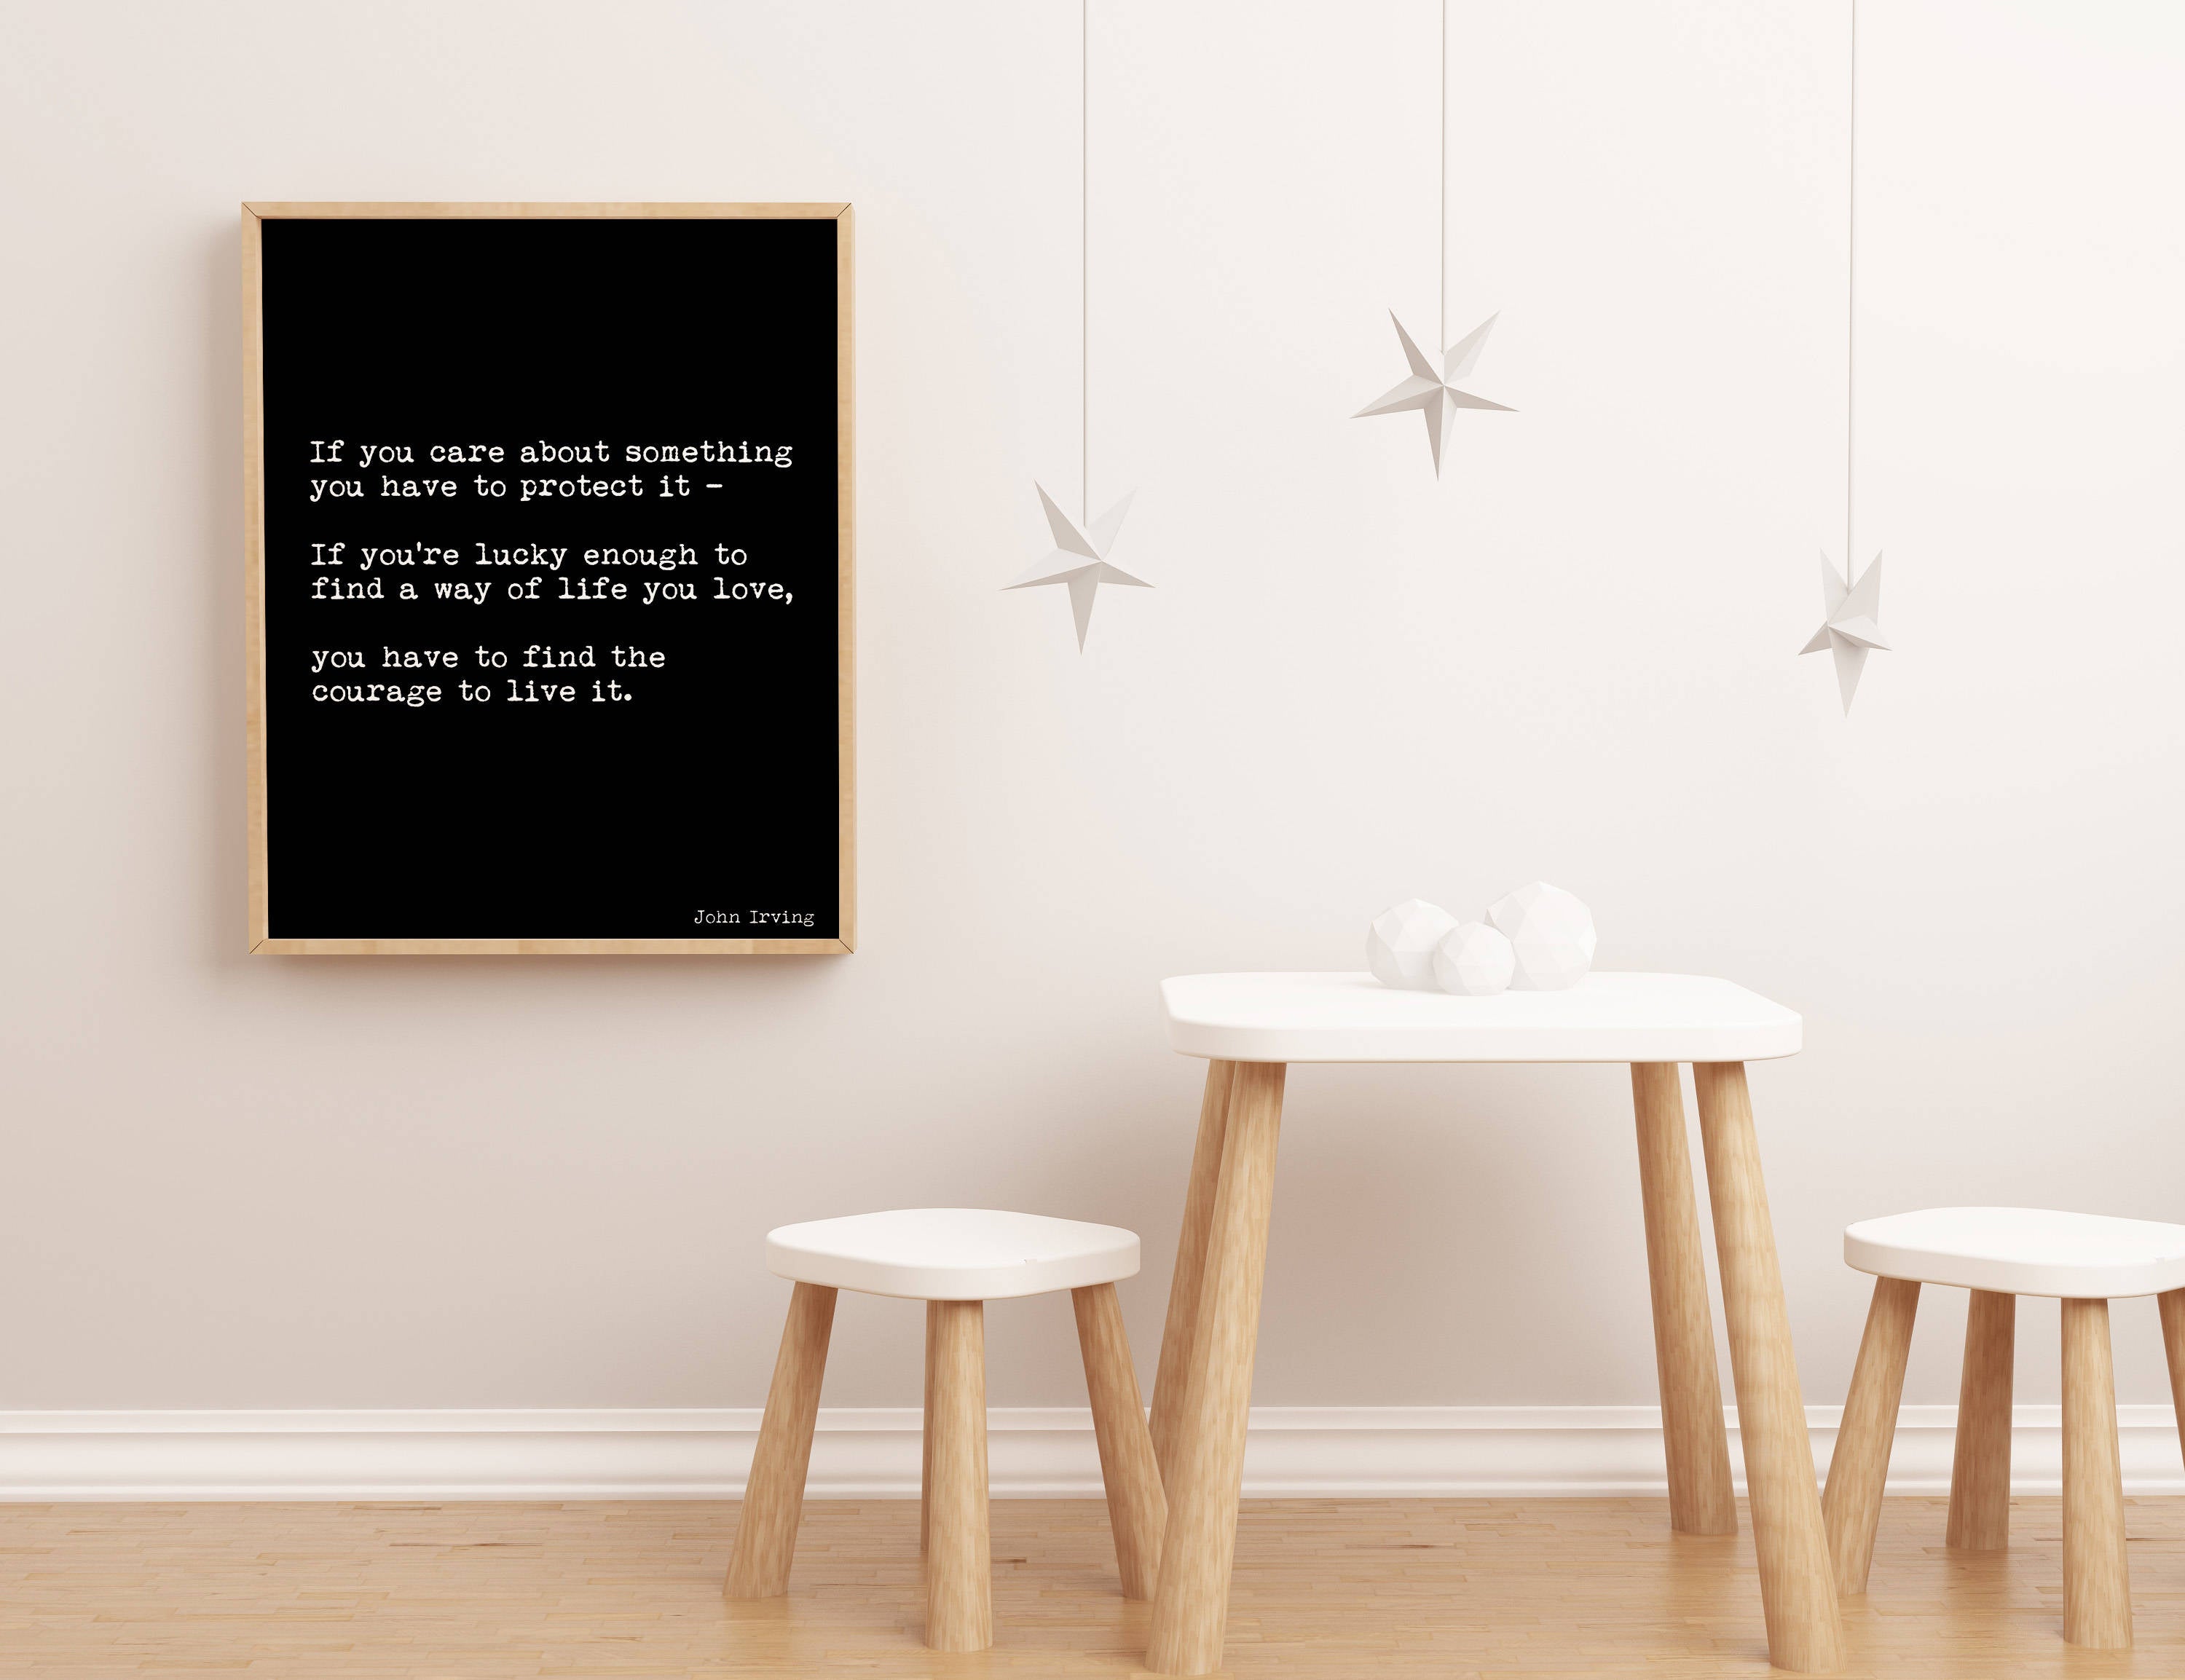 Way Of Life You Love Life Quote Motivational Print, Inspirational Quote Print Featuring A John Irving Quote In Black & White unframed